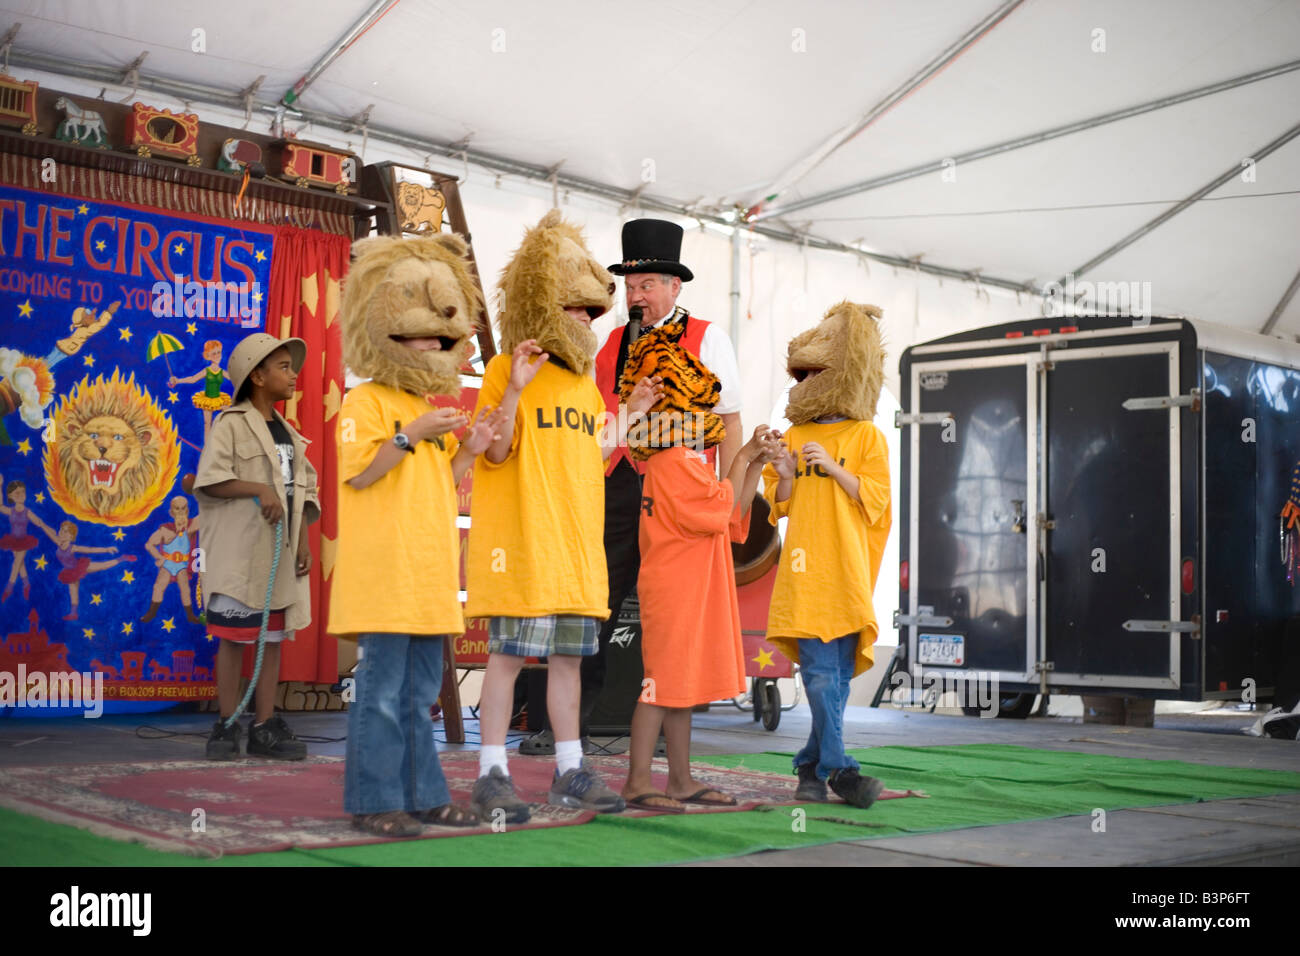 children participating in circus show wearing lion masks at New Mexico state fair Stock Photo